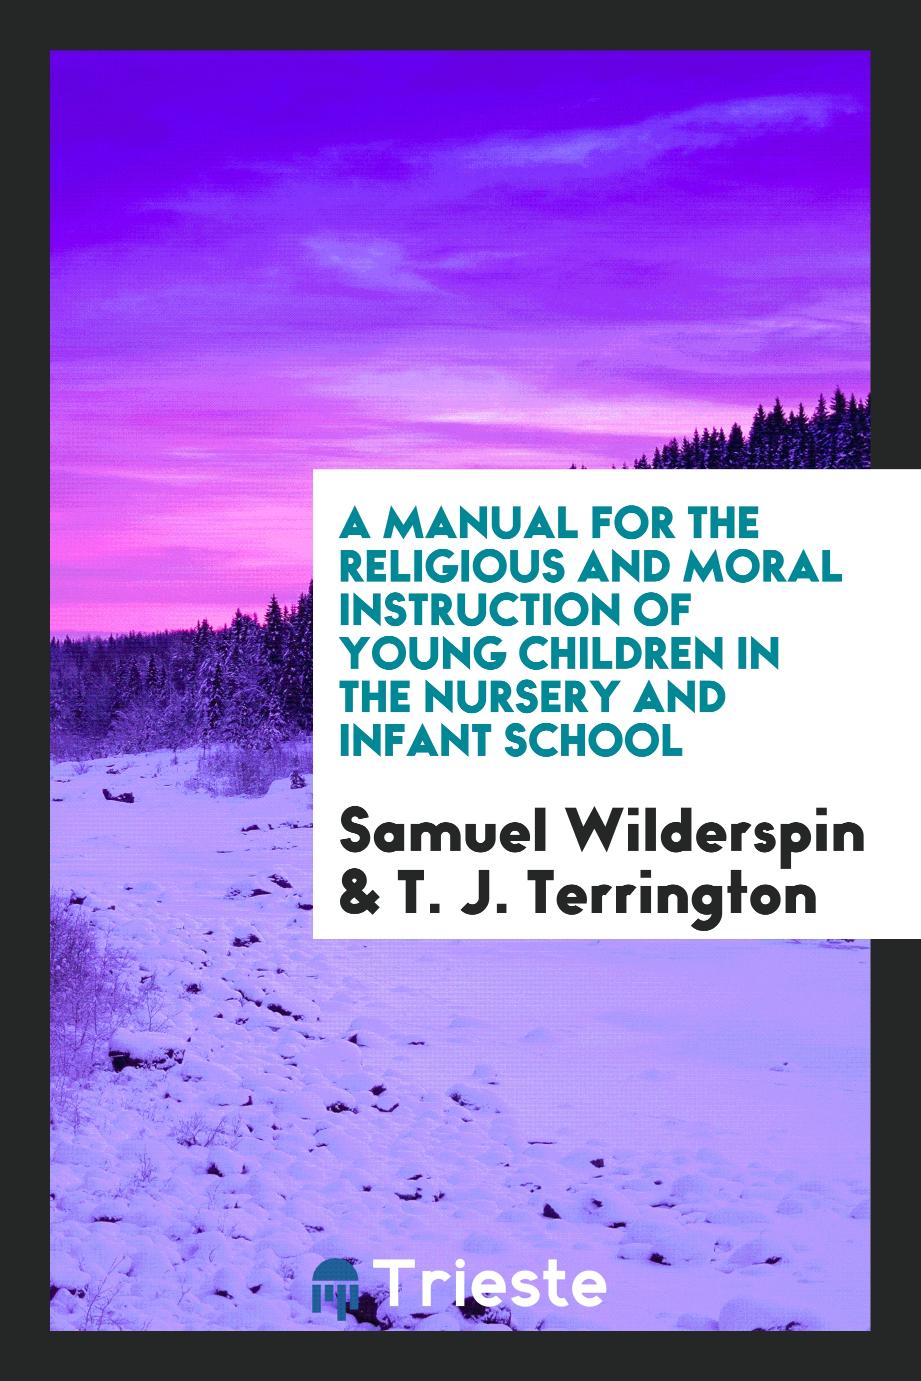 A Manual for the Religious and Moral Instruction of Young Children in the Nursery and Infant School